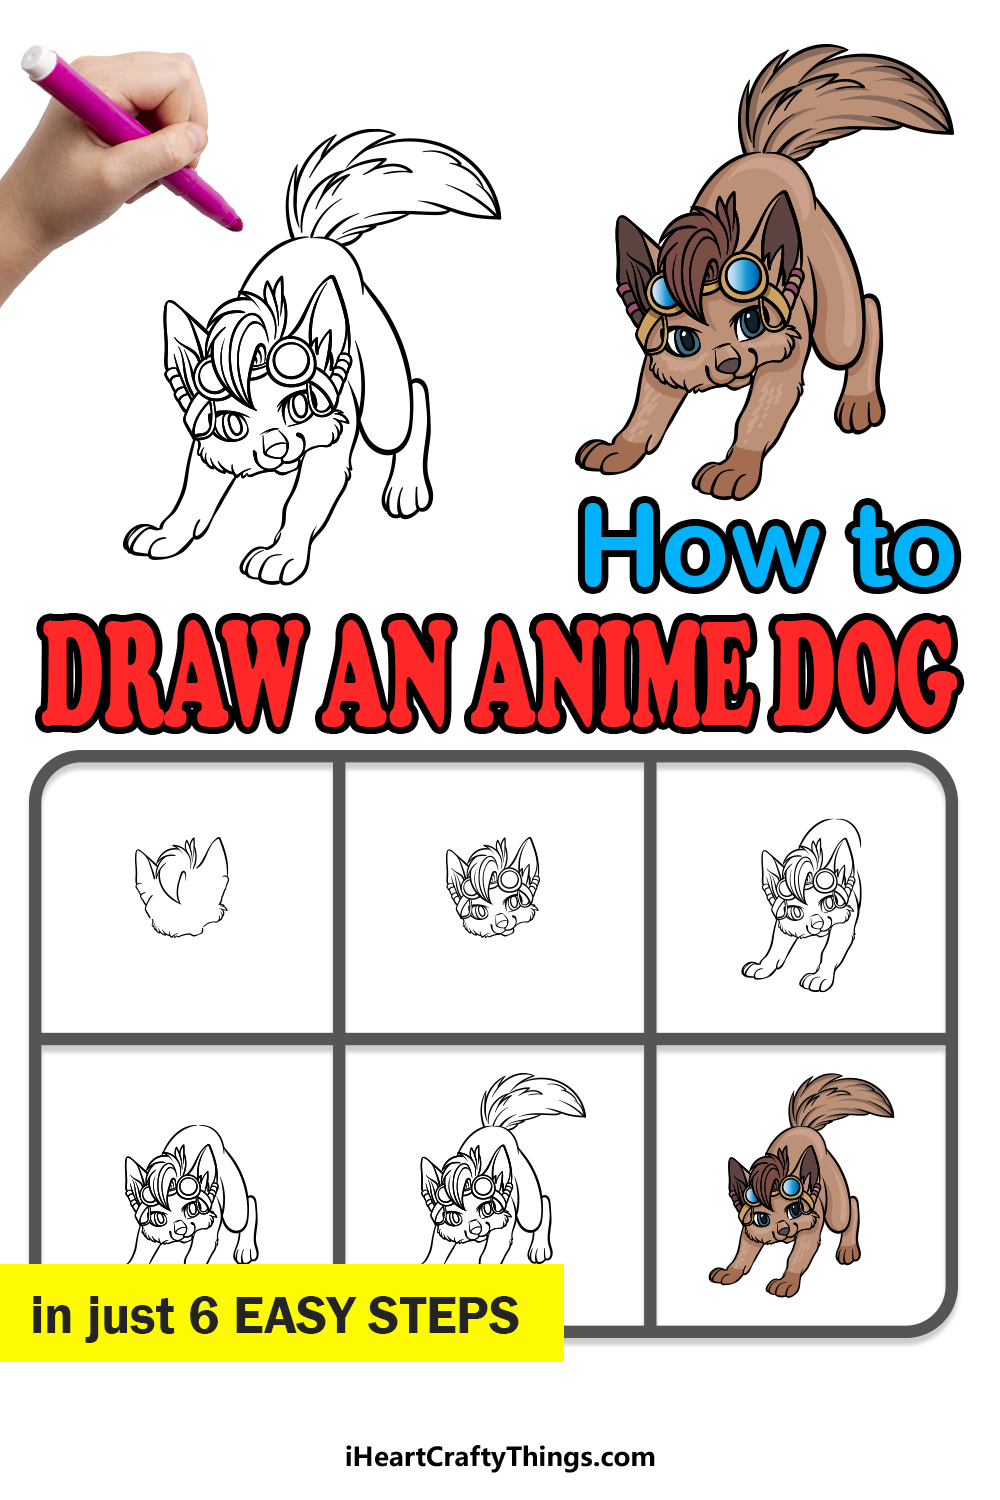 how to draw an Anime Dog in 6 easy steps